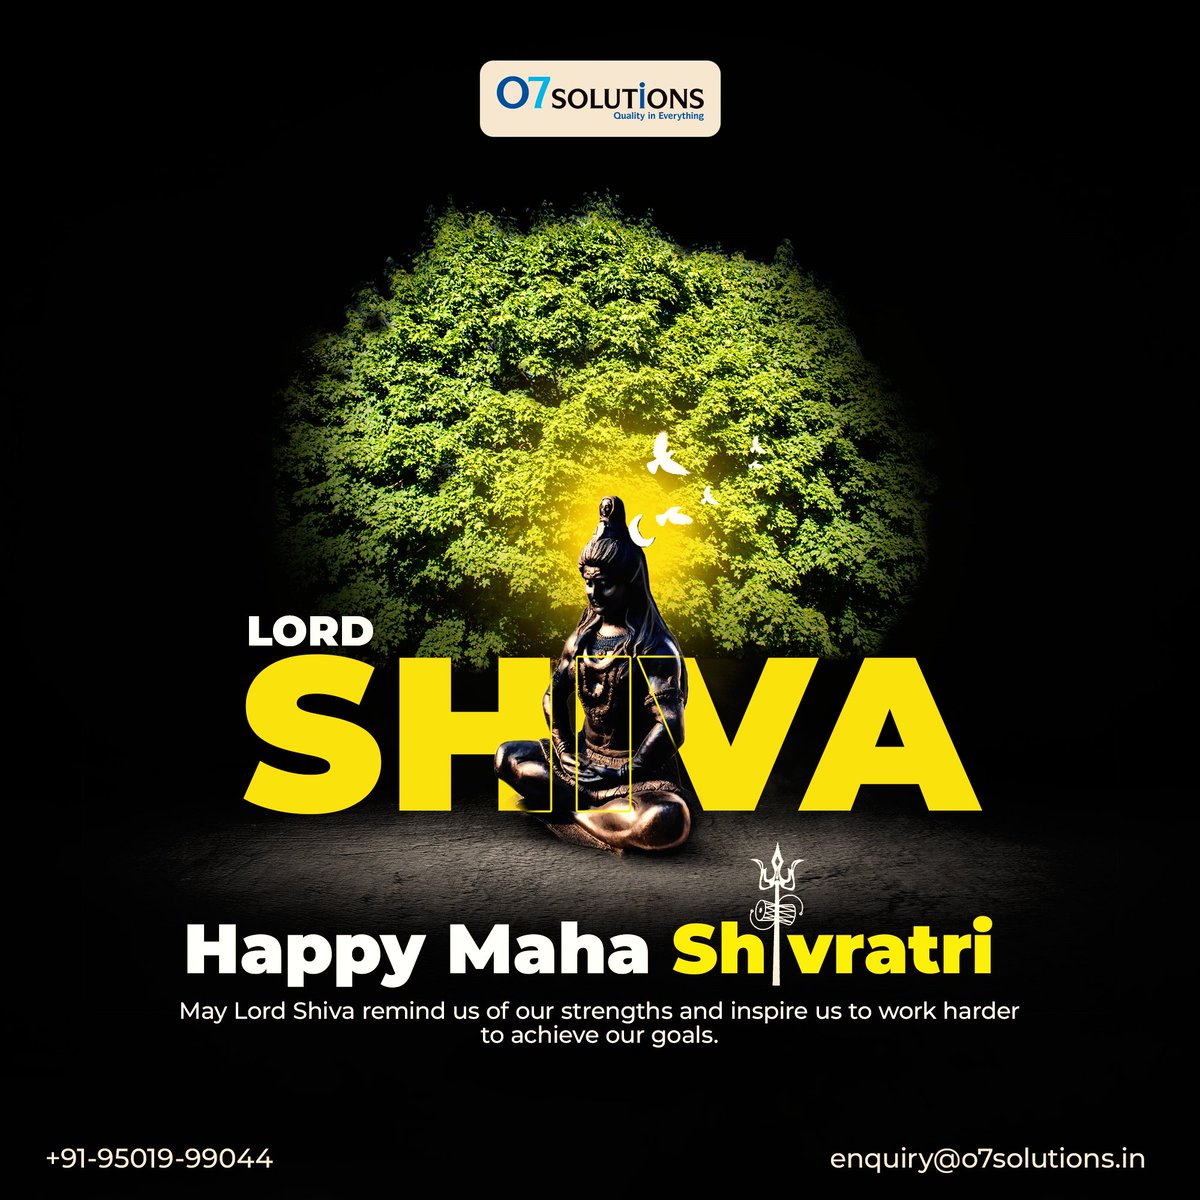 Wishing you a Shivratri filled with digital prosperity and innovation!  O7 Solutions sends warm wishes for a journey filled with stunning websites, seamless apps, and top-notch SEO. #O7Solutions #DigitalProsperity

#shivratri #mahadev #shiva #mahashivratri #bholenath #shiv